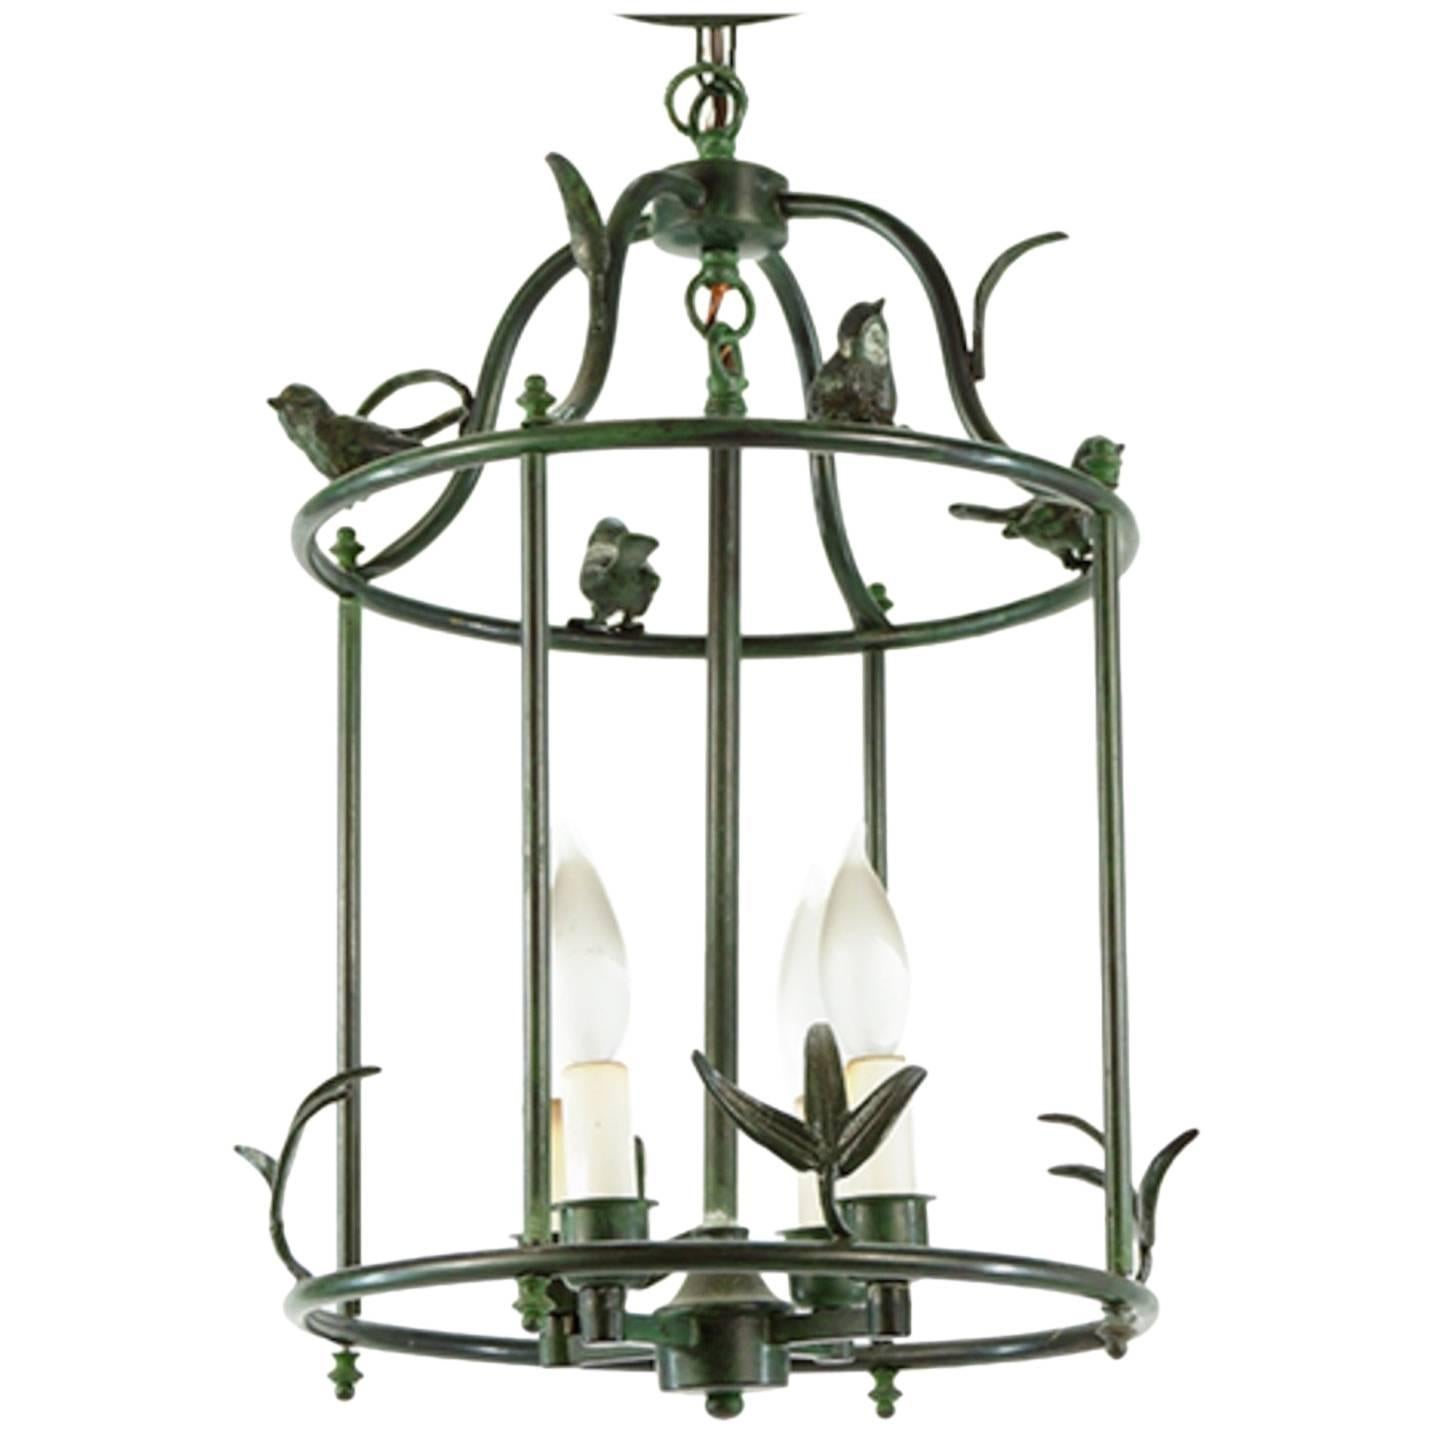 Birdcage Form Hanging Lantern with Verdigres Finish in the Style of Giacometti